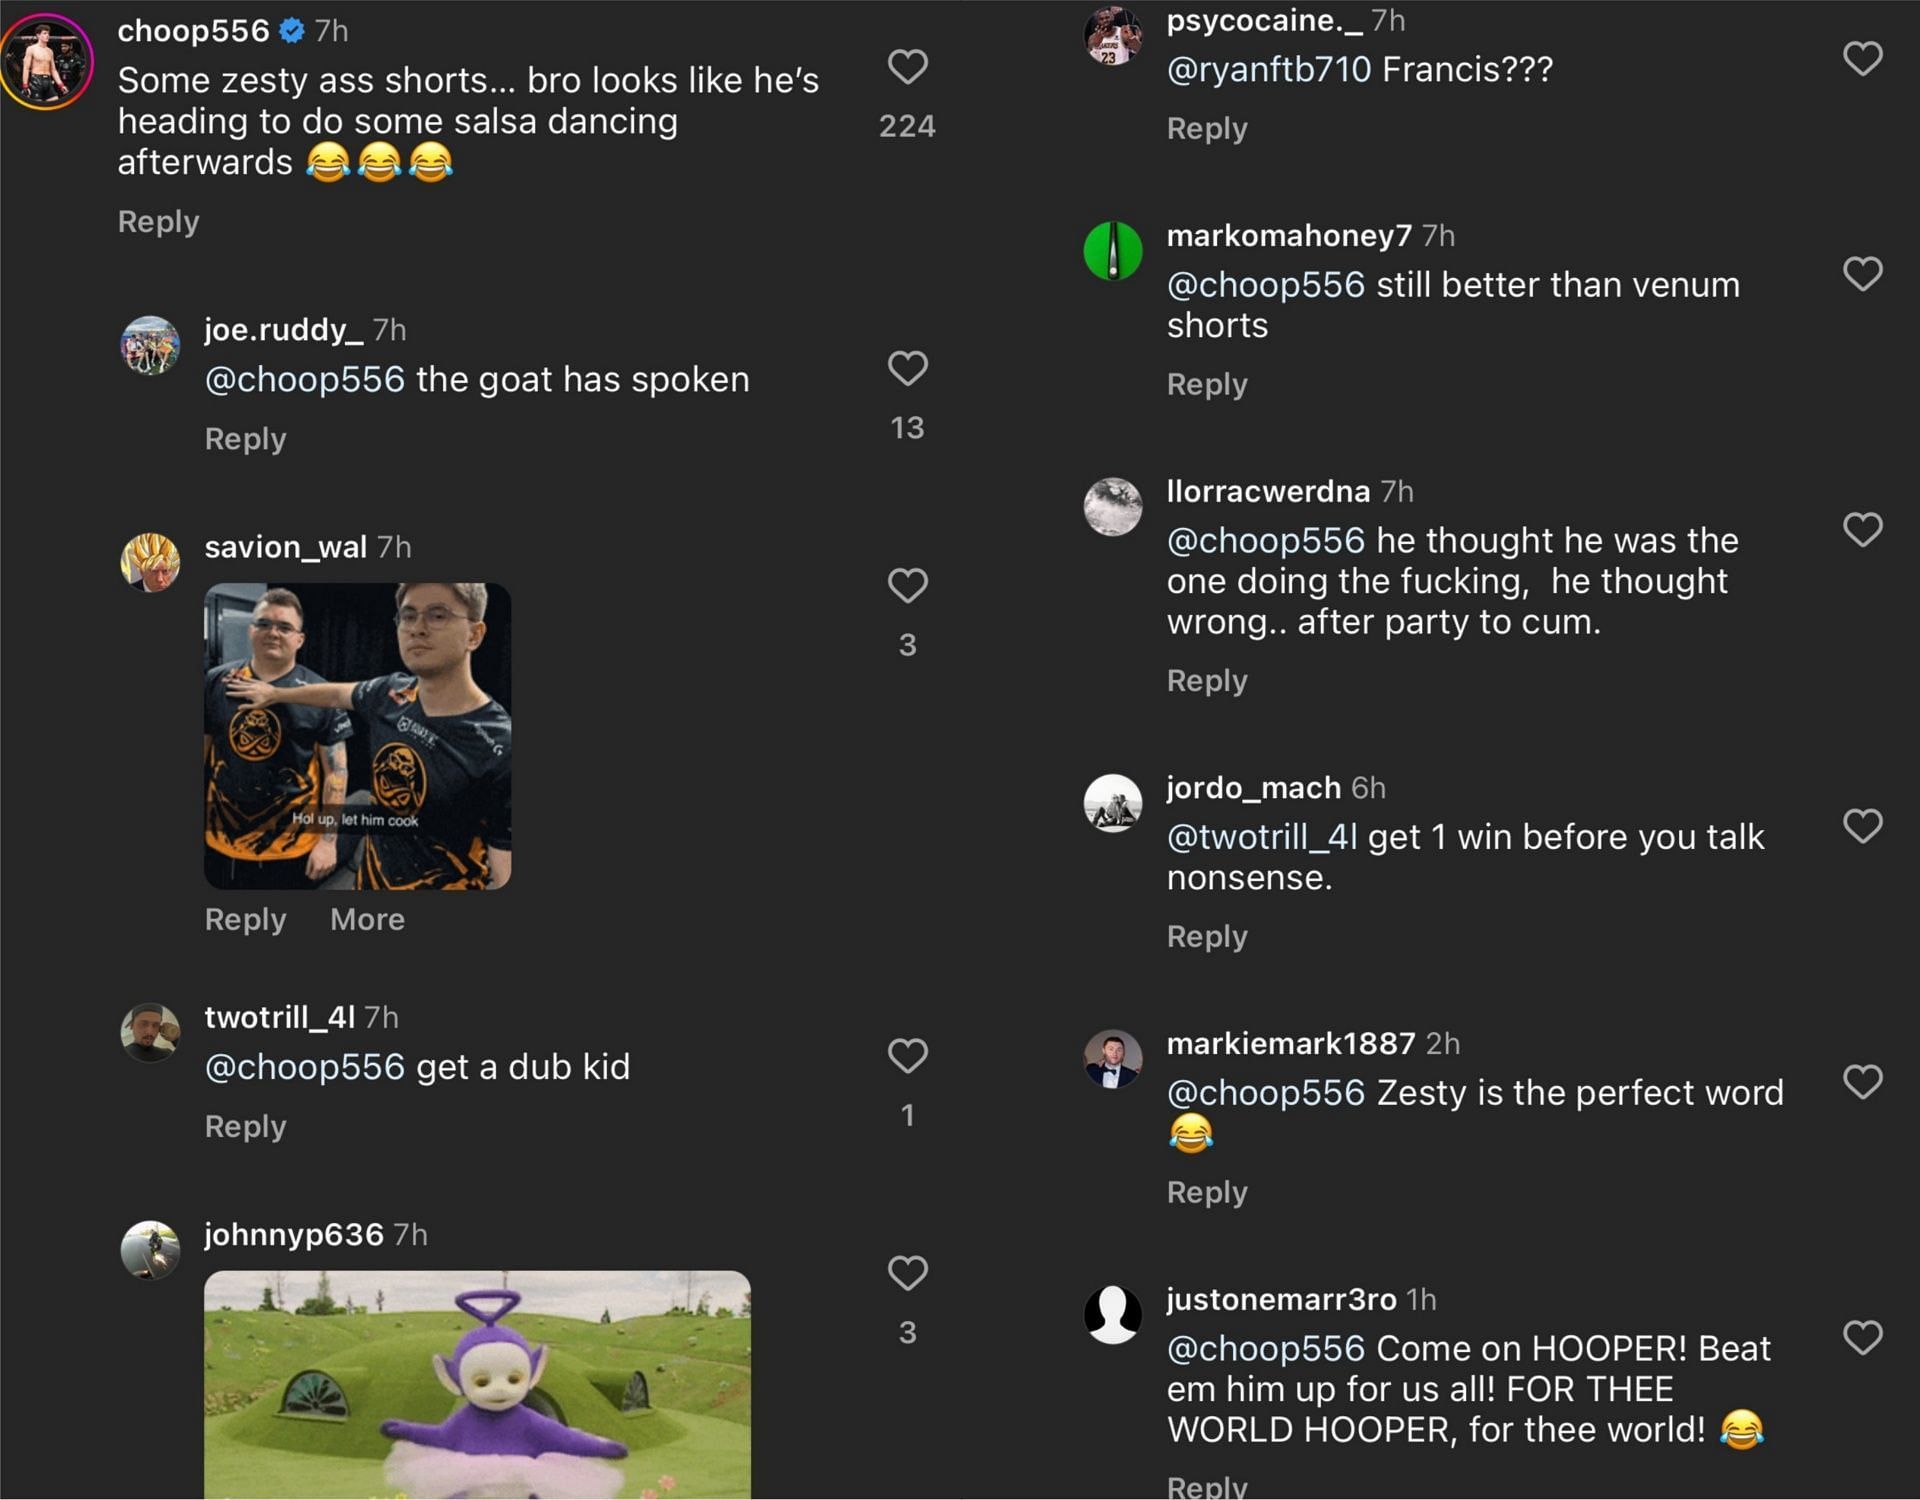 Fan reactions to Chase Hooper&#039;s comment on Jake Paul&#039;s shorts